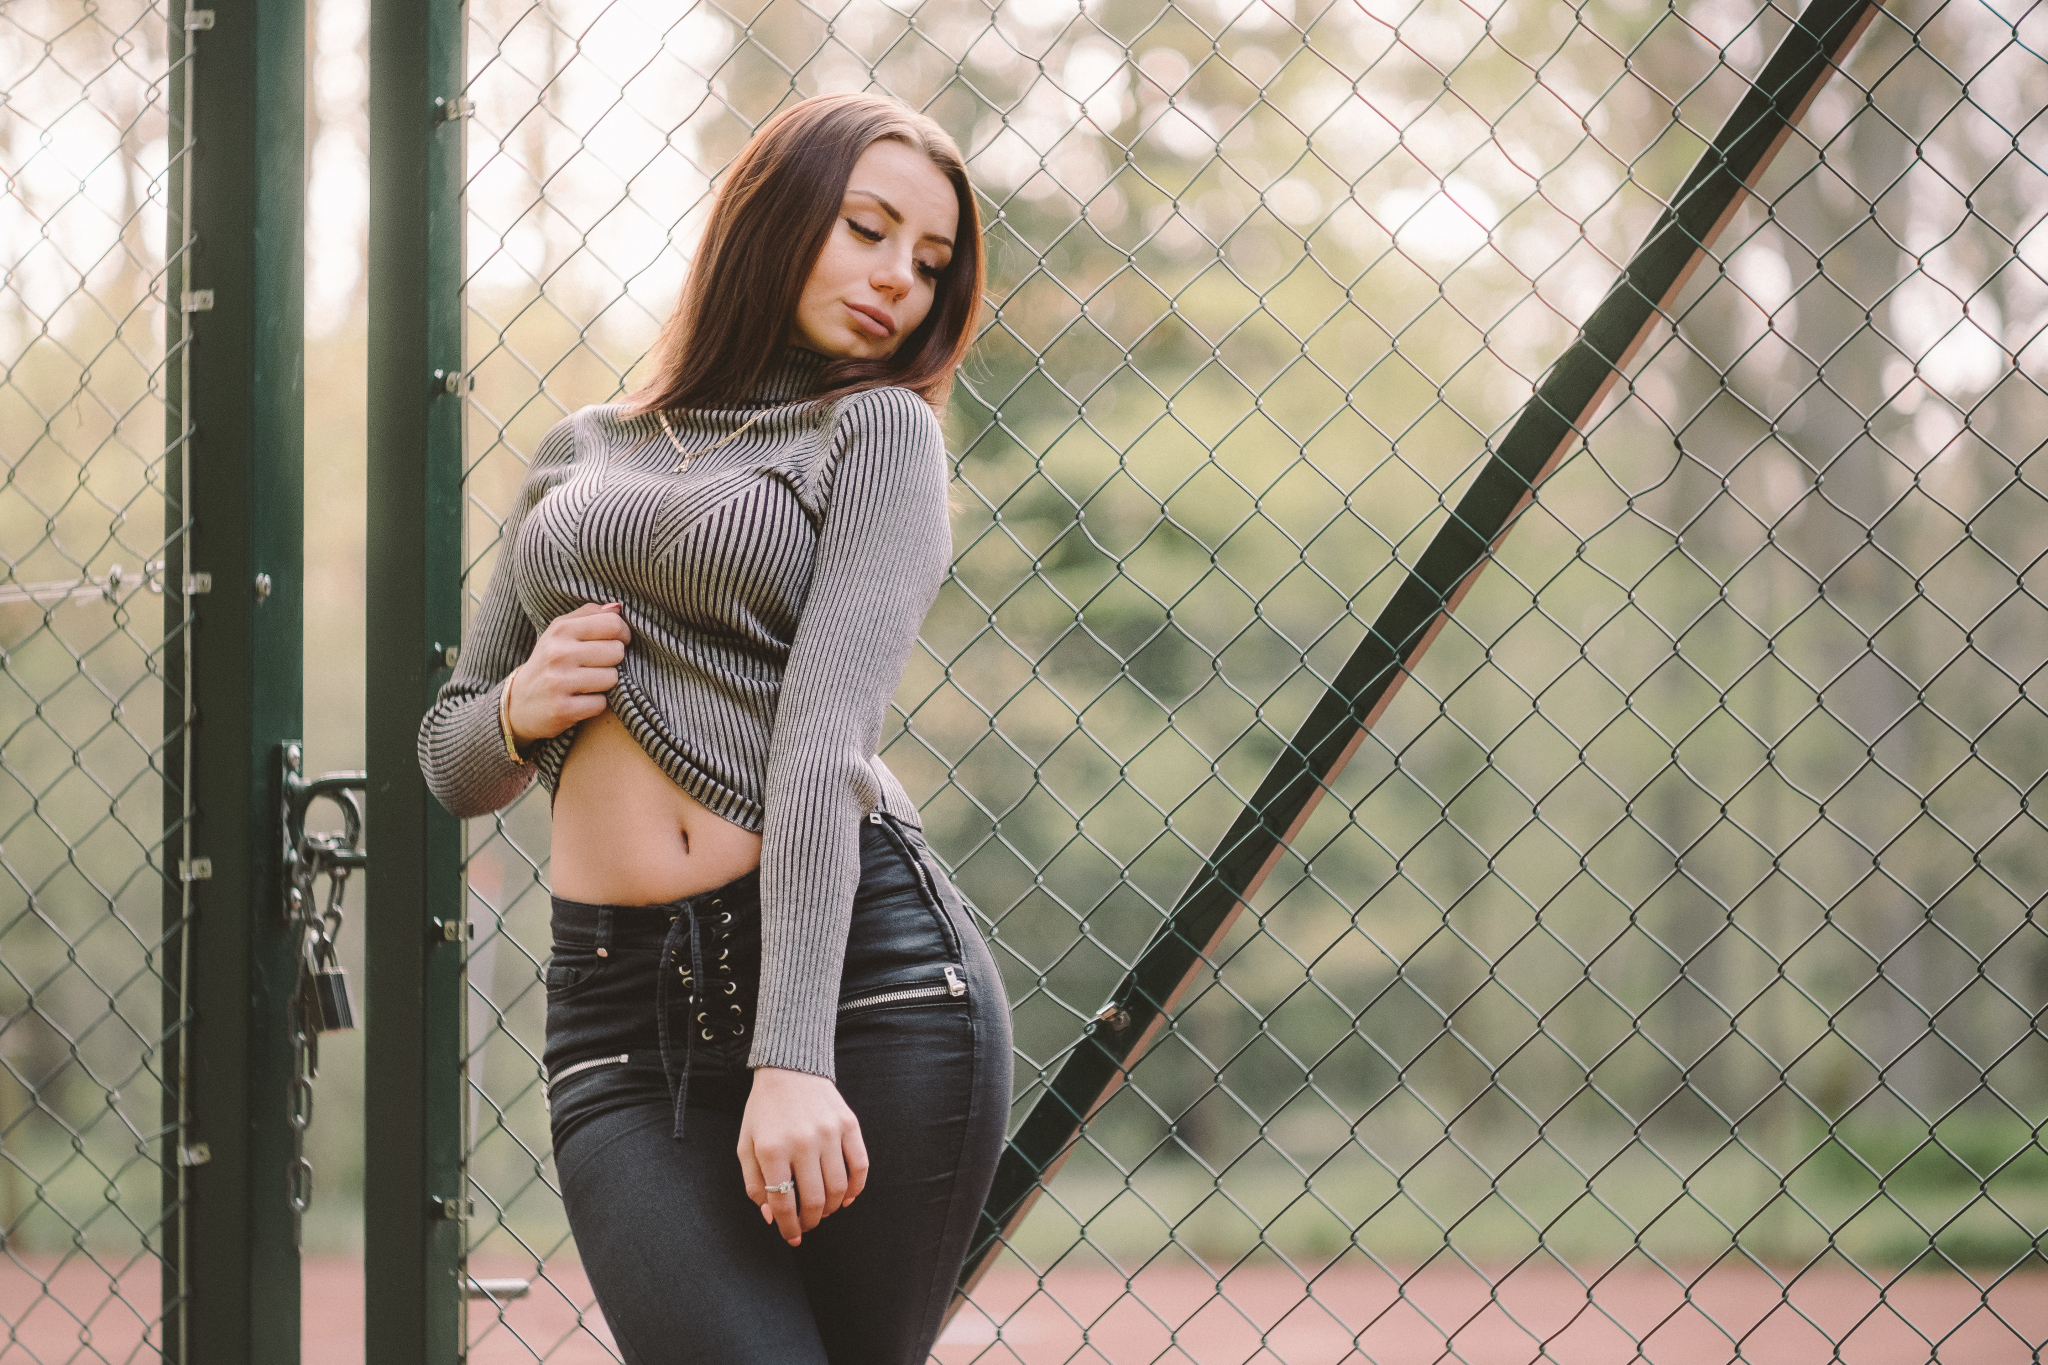 People 2048x1365 women model brunette necklace turtlenecks sweater belly jeans frontal view depth of field fence chain-link Thomas Ohlsson outdoors women outdoors